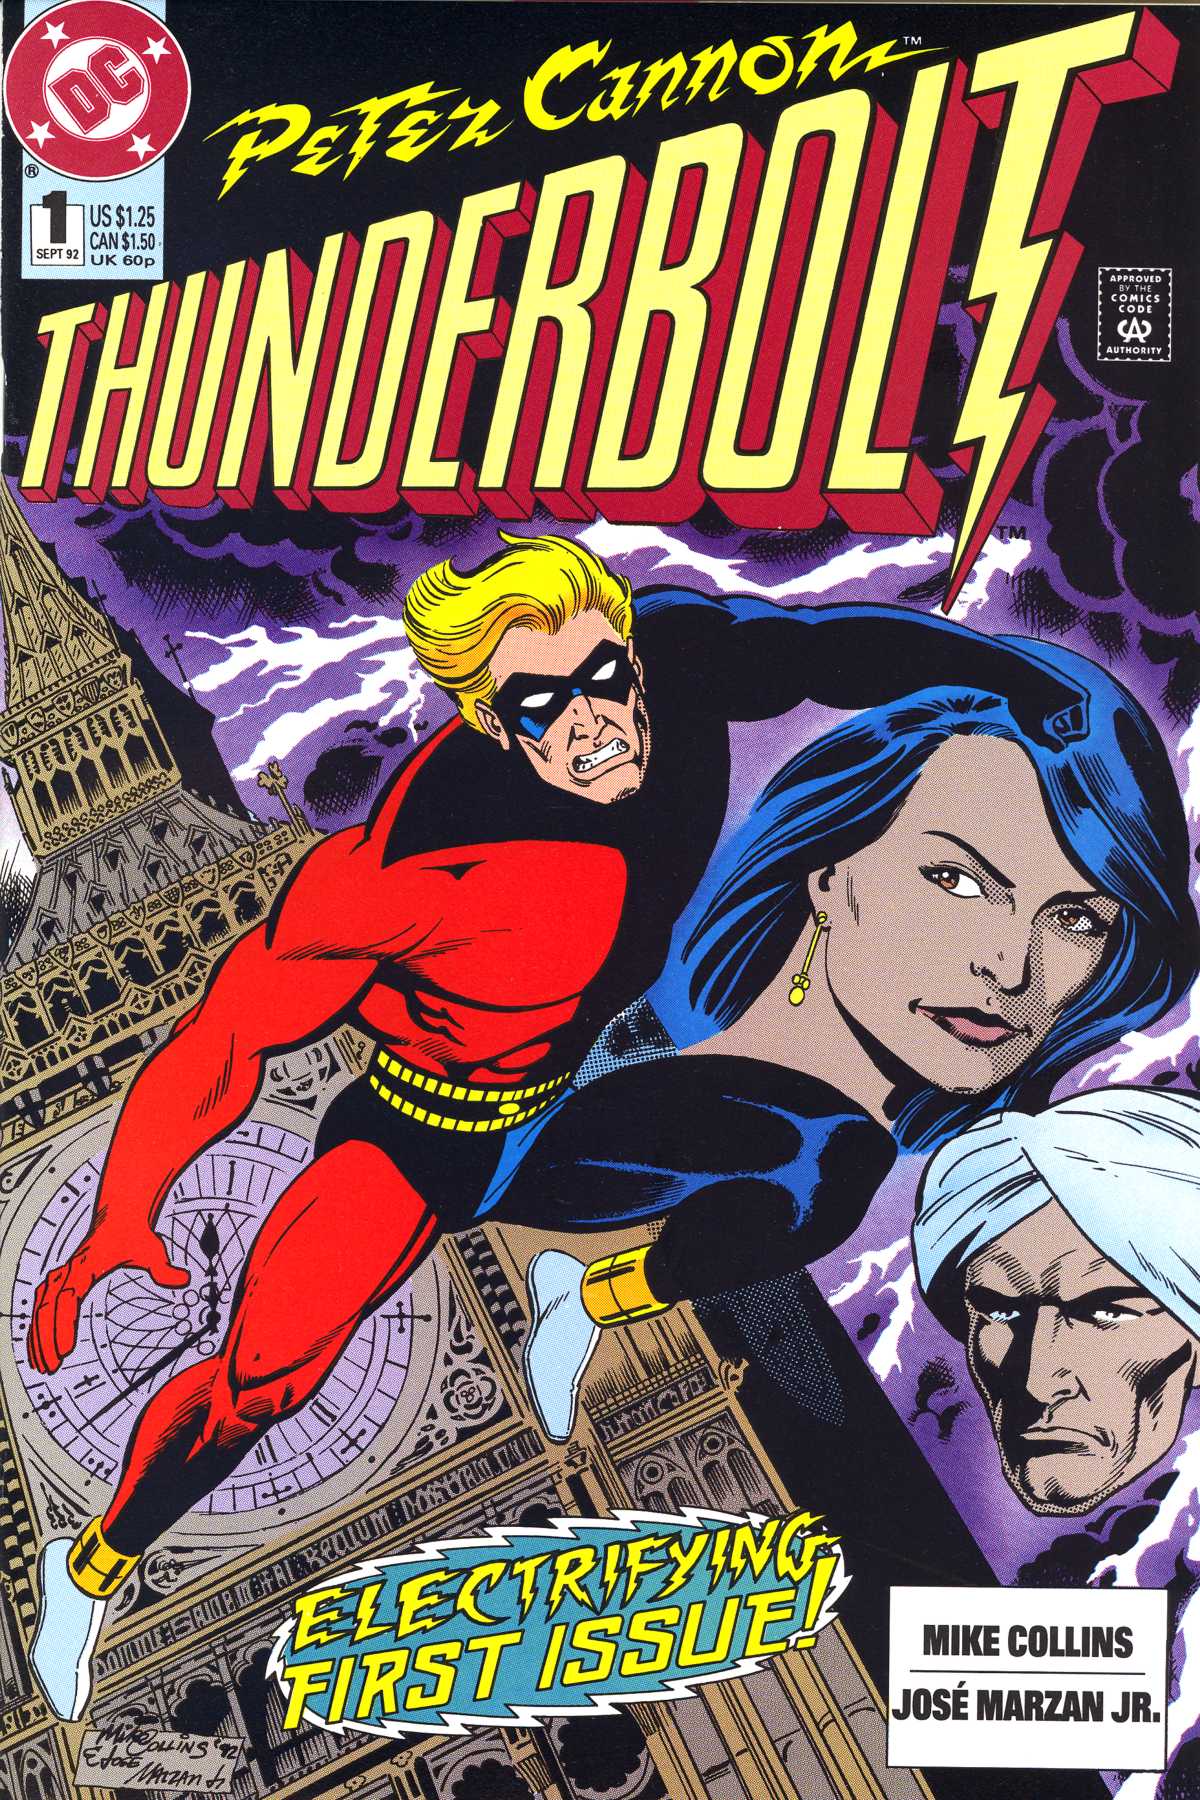 Read online Peter Cannon--Thunderbolt (1992) comic -  Issue #1 - 1